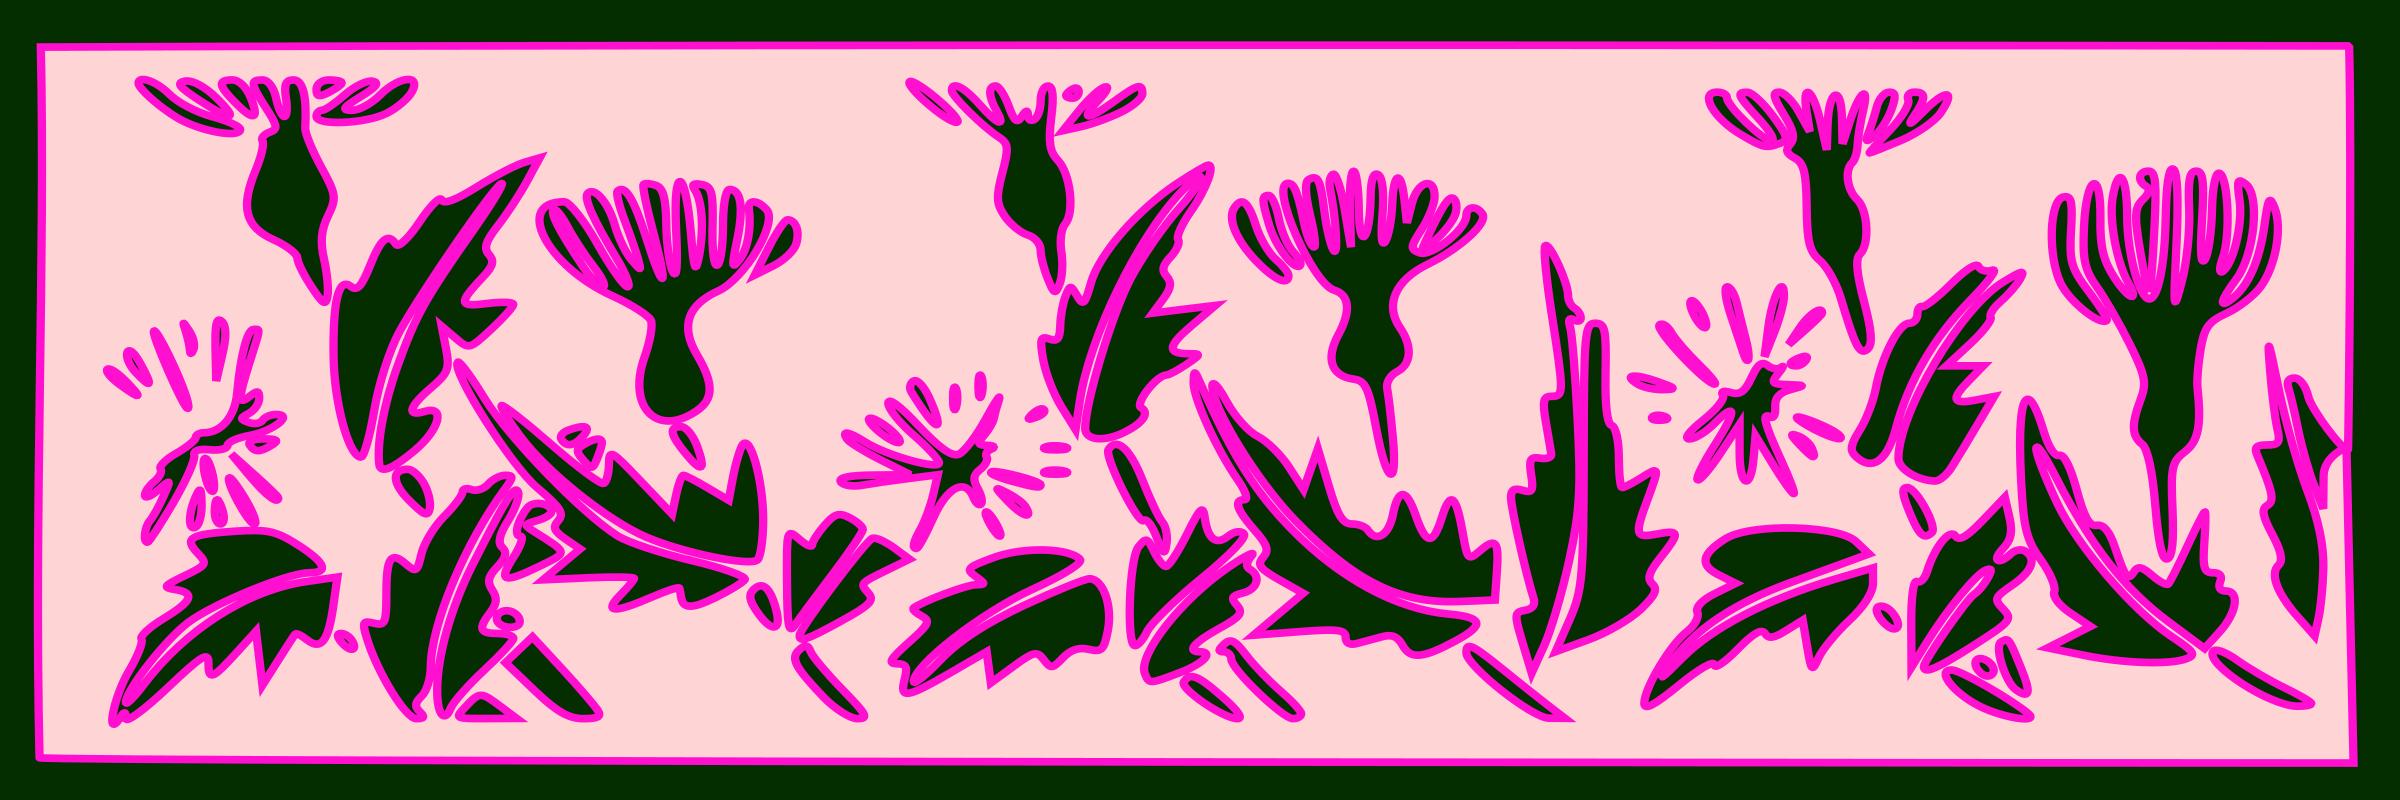 thistle-002-2 png